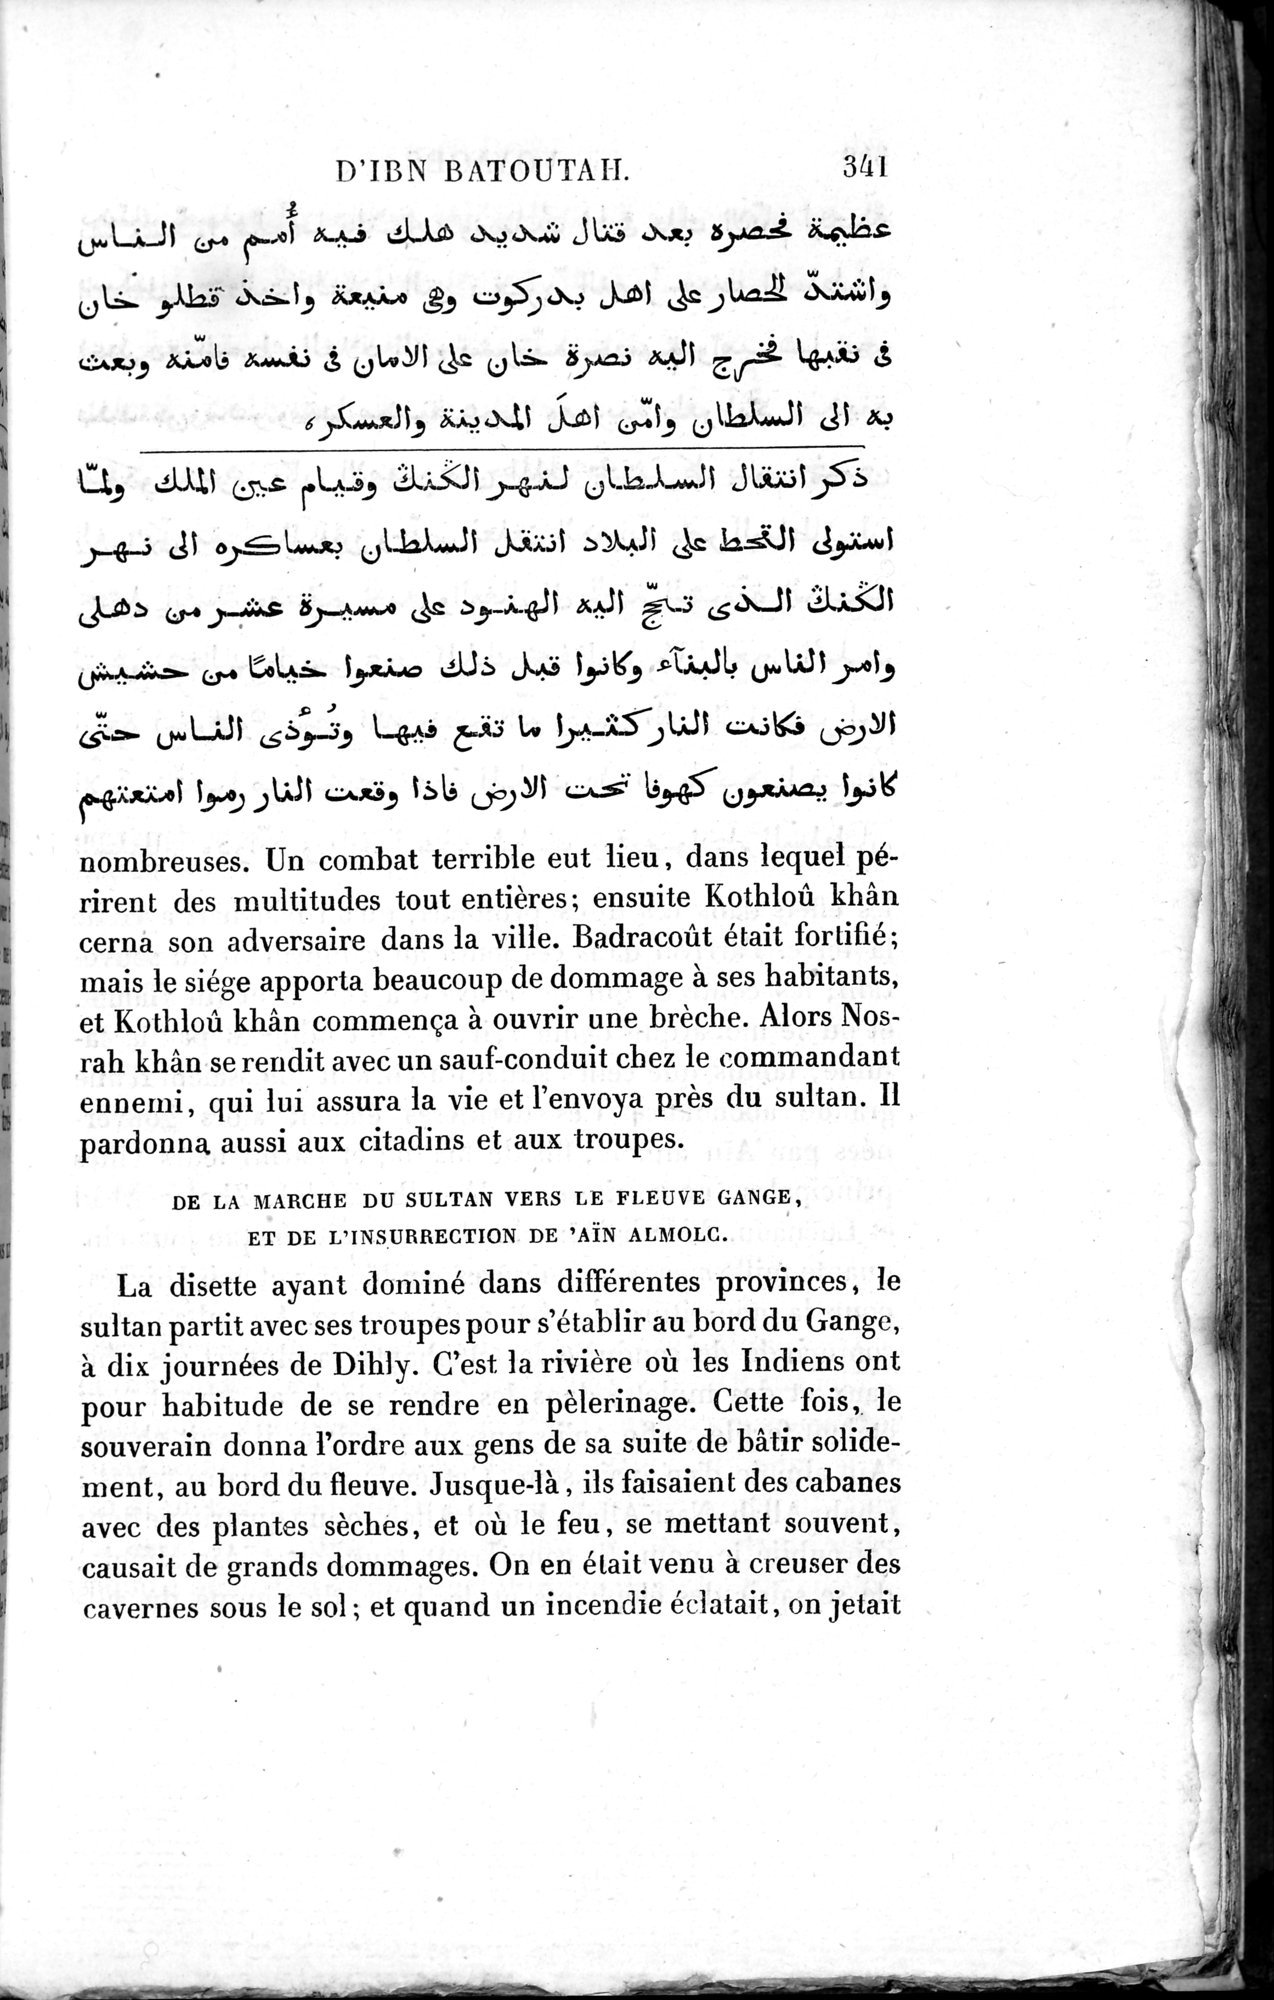 Voyages d'Ibn Batoutah : vol.3 / Page 381 (Grayscale High Resolution Image)